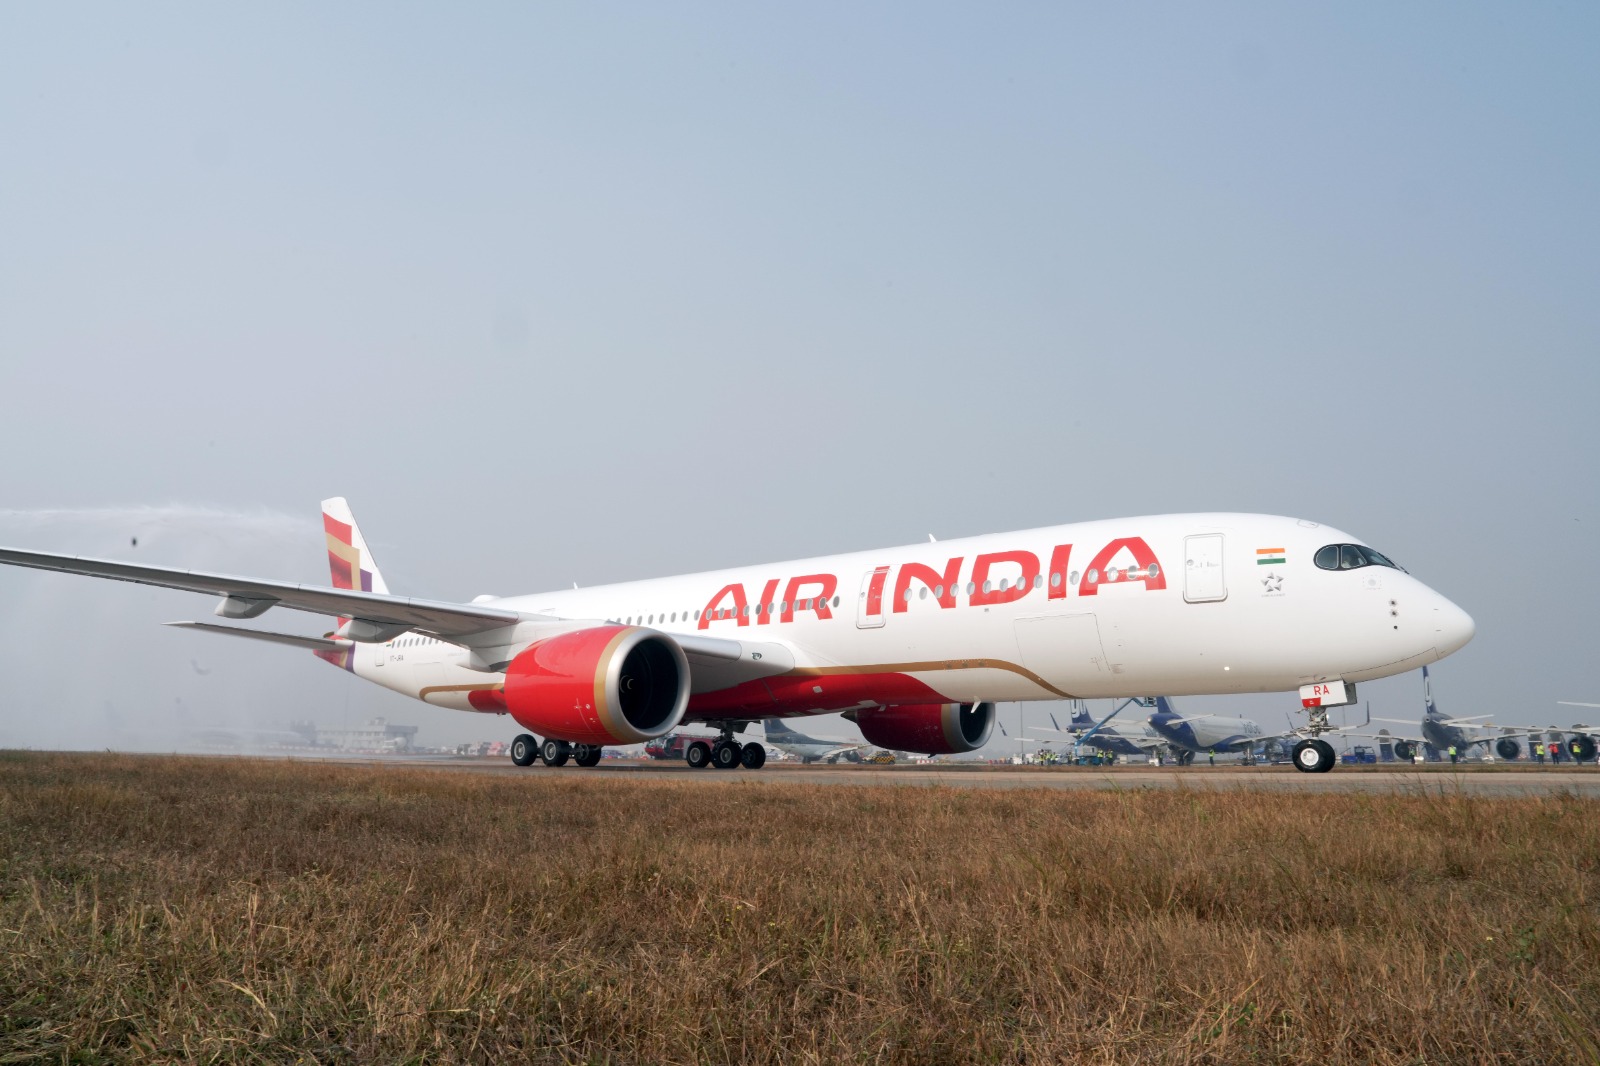 Air India to operate non-stop Delhi-Kuala Lumpur flights from Sept 15